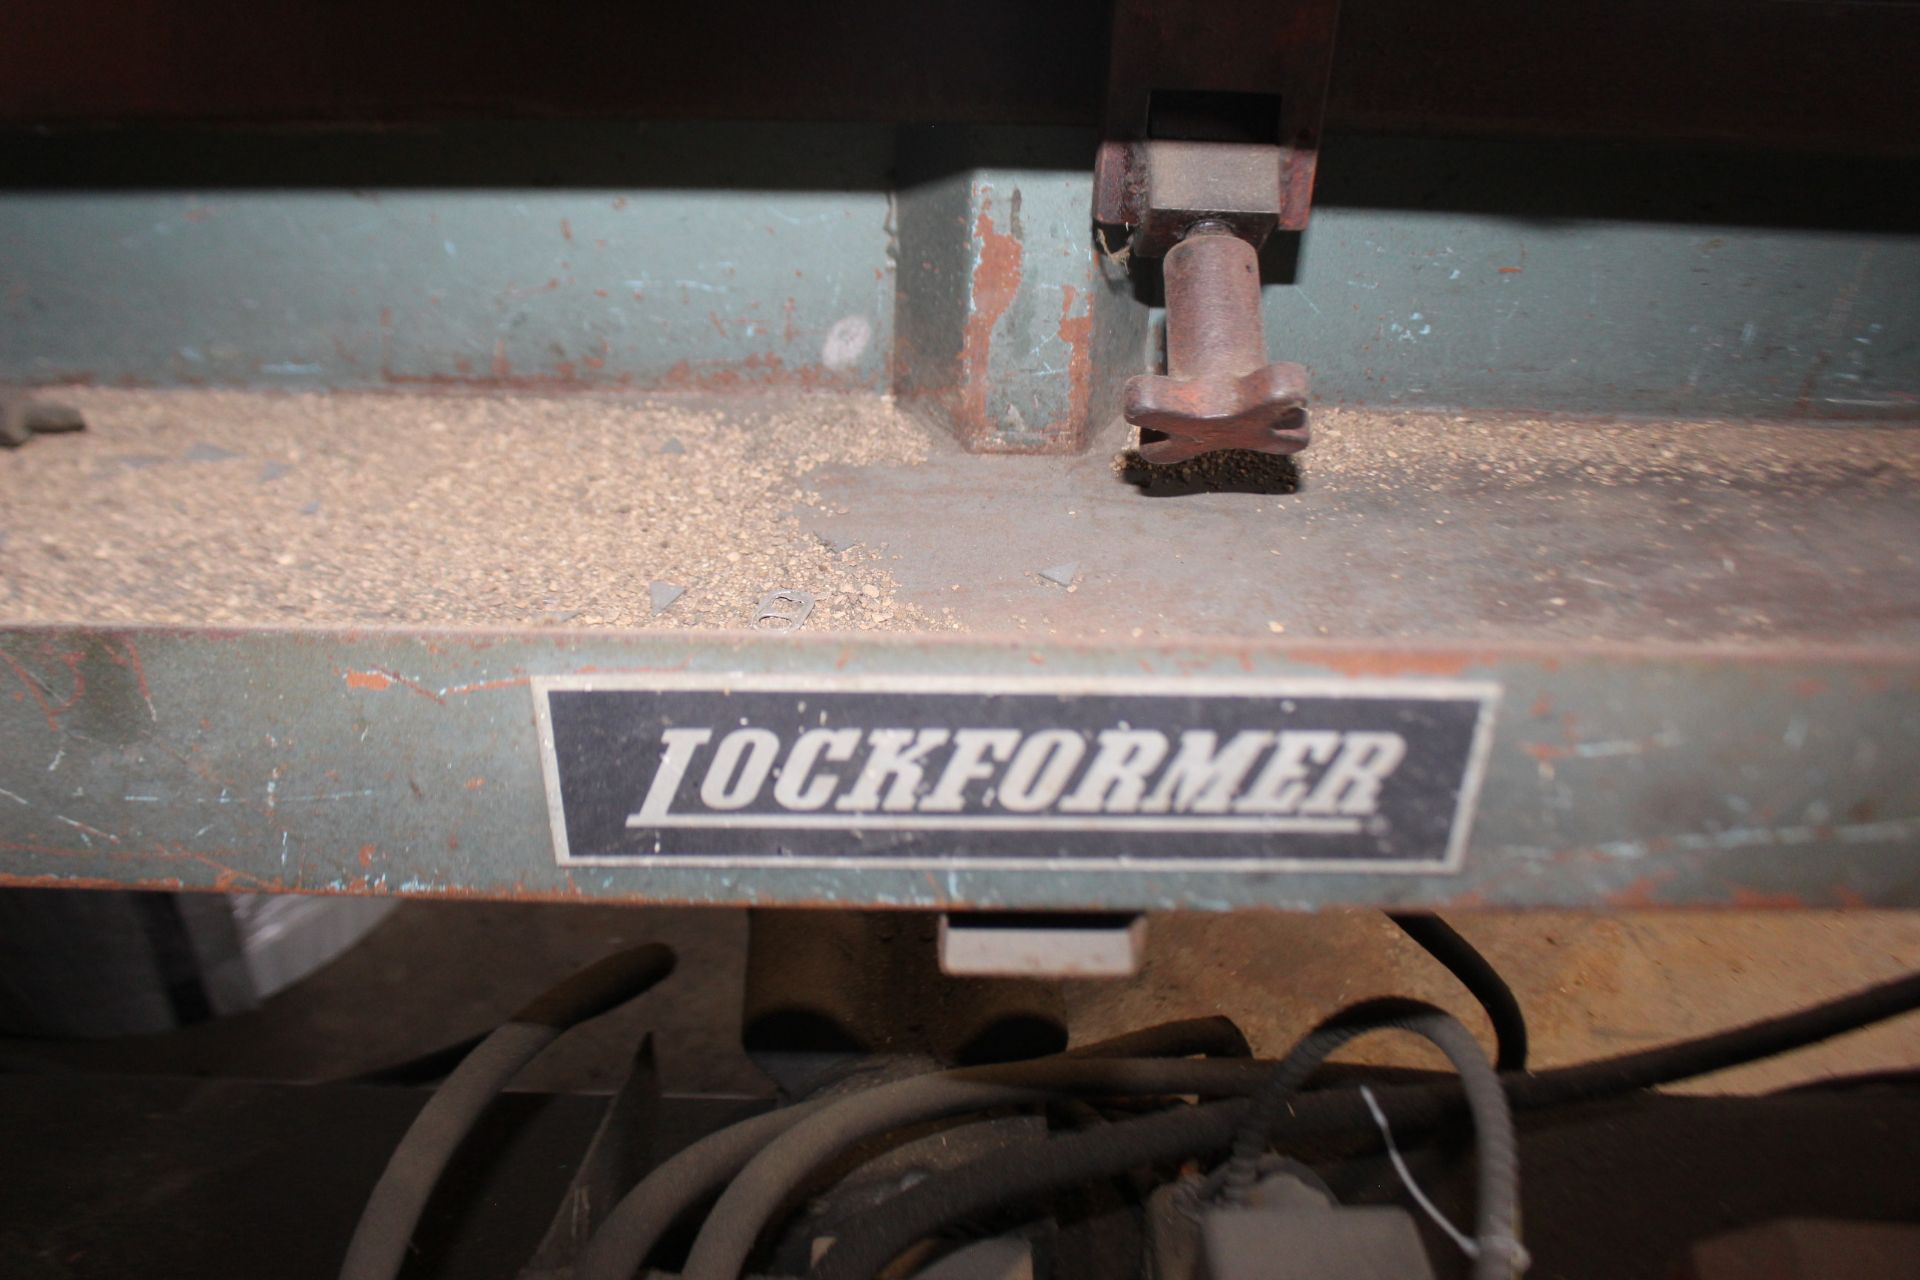 POWER NOTCHER, LOCKFORMER (Location #1: Tyco Air Products, Inc., 17309 Hufsmith Kohrville Road, - Image 3 of 3